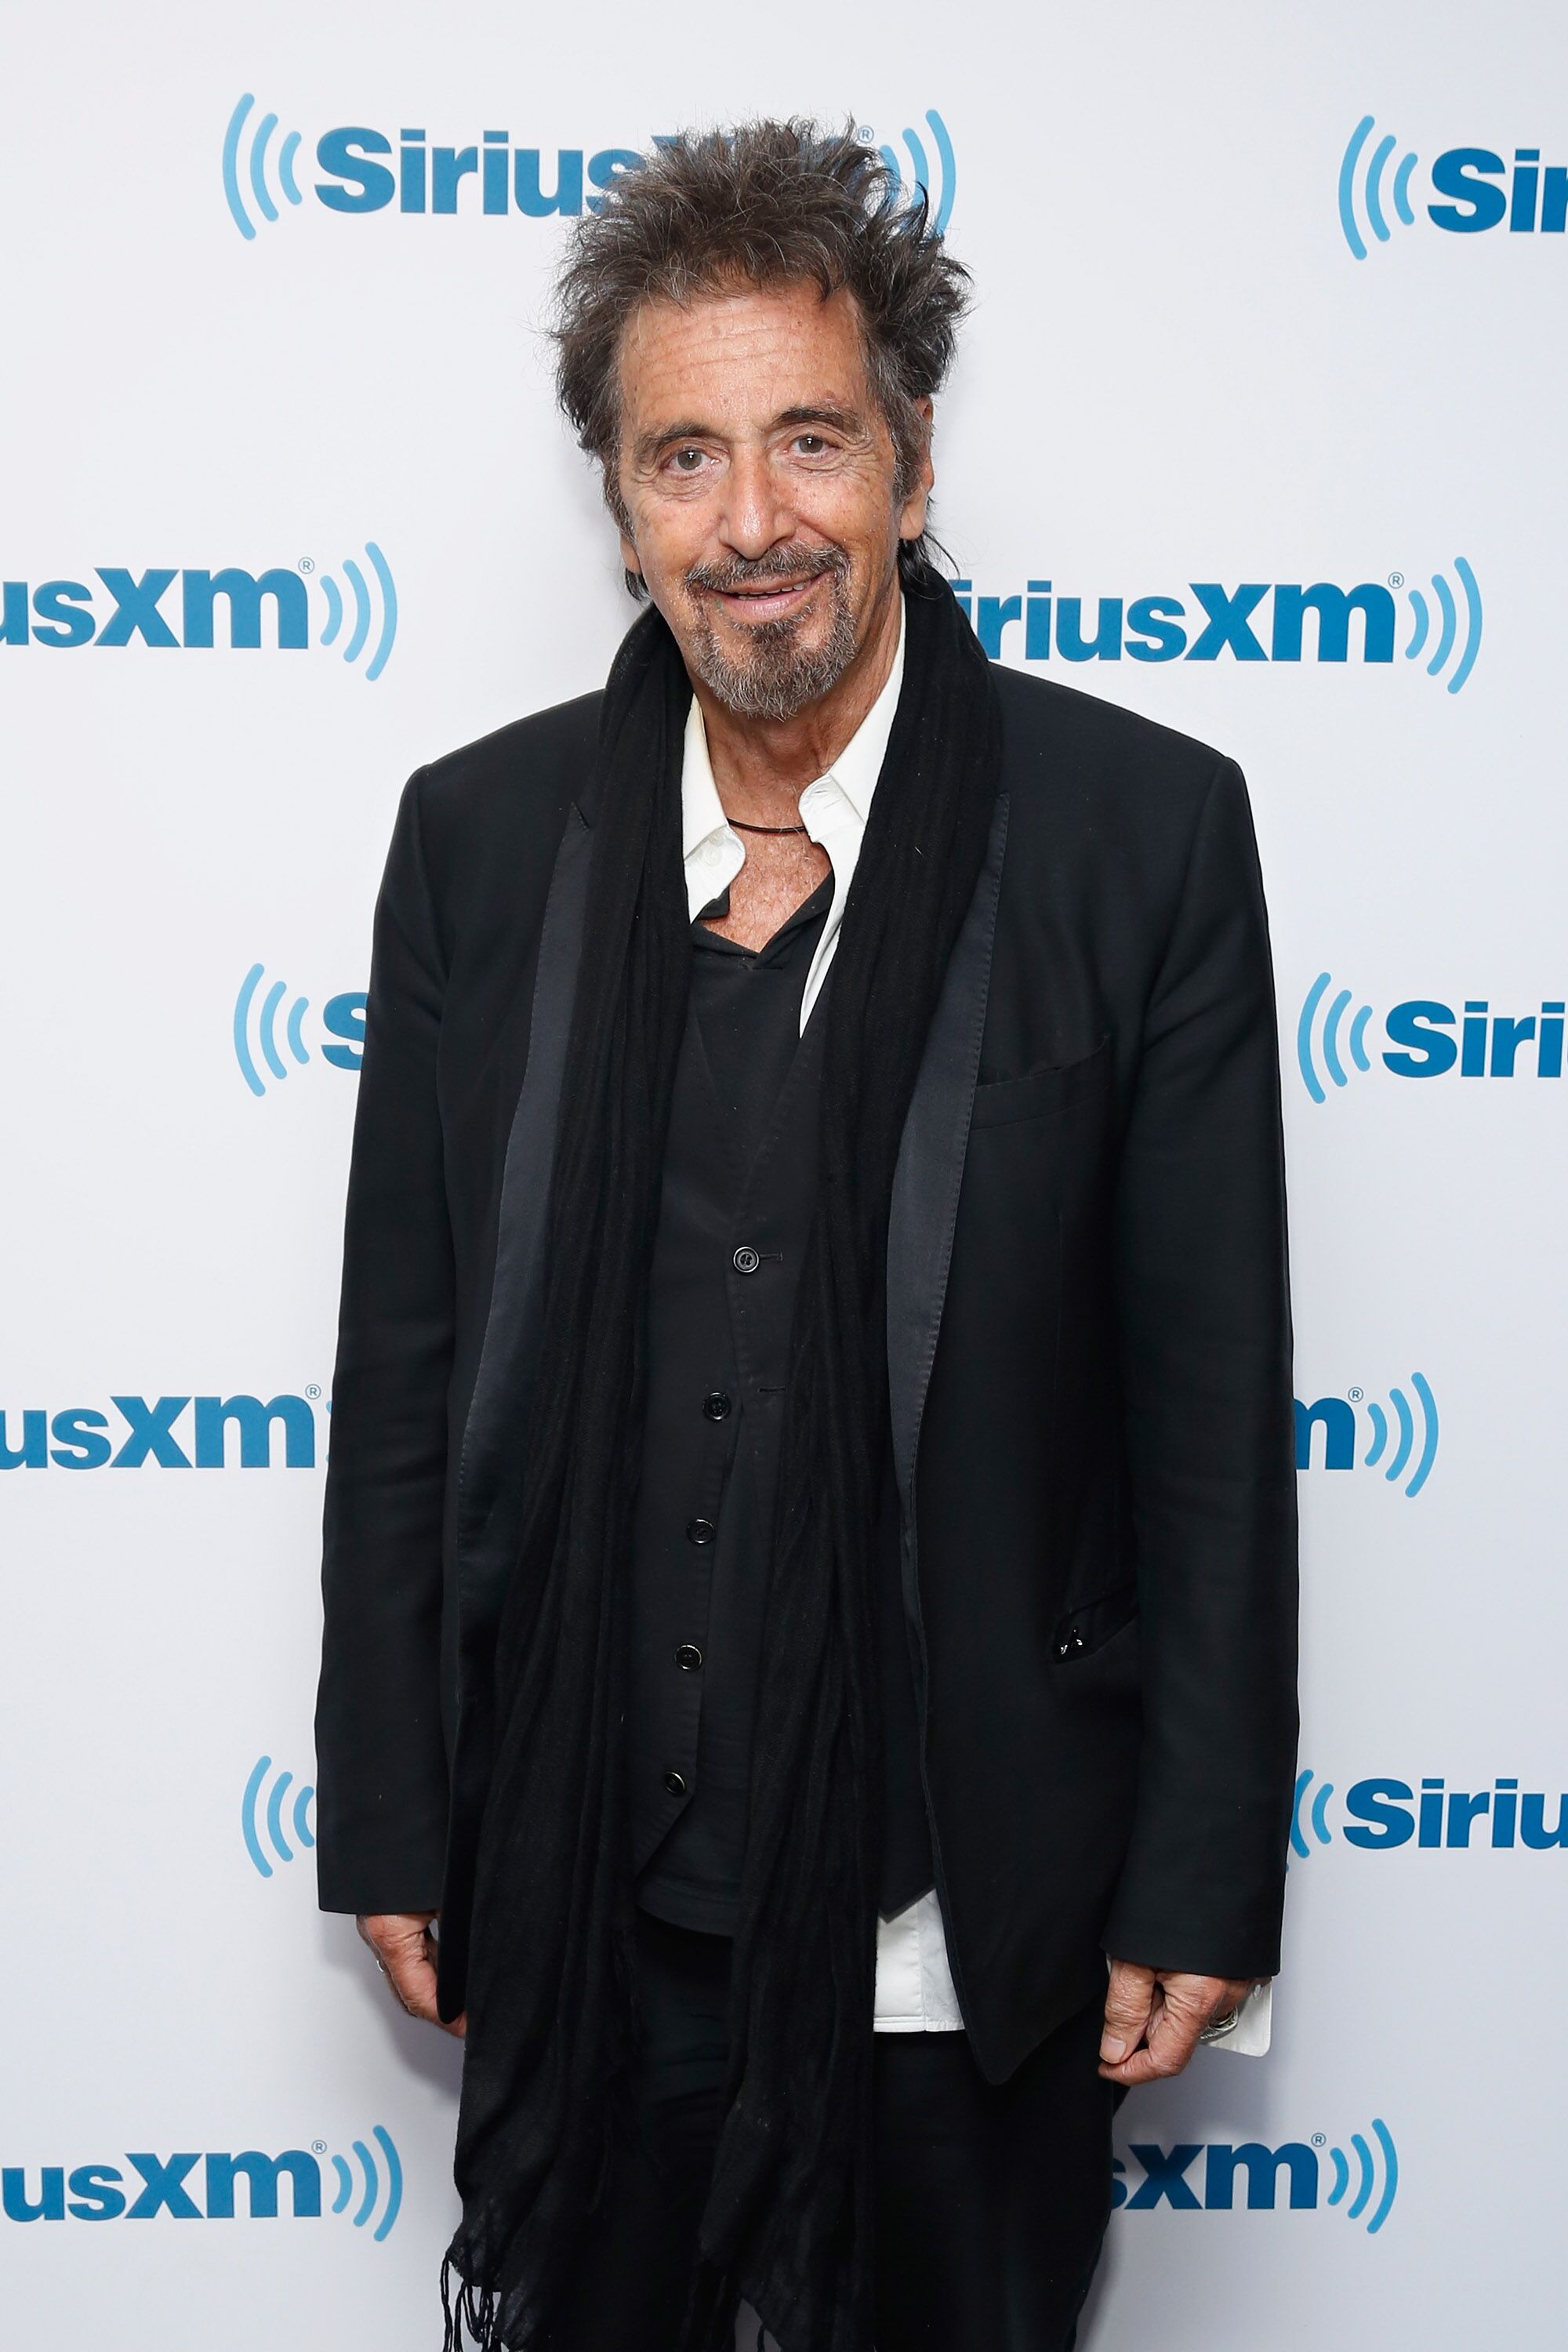 Al Pacino. I Image: Getty Images.